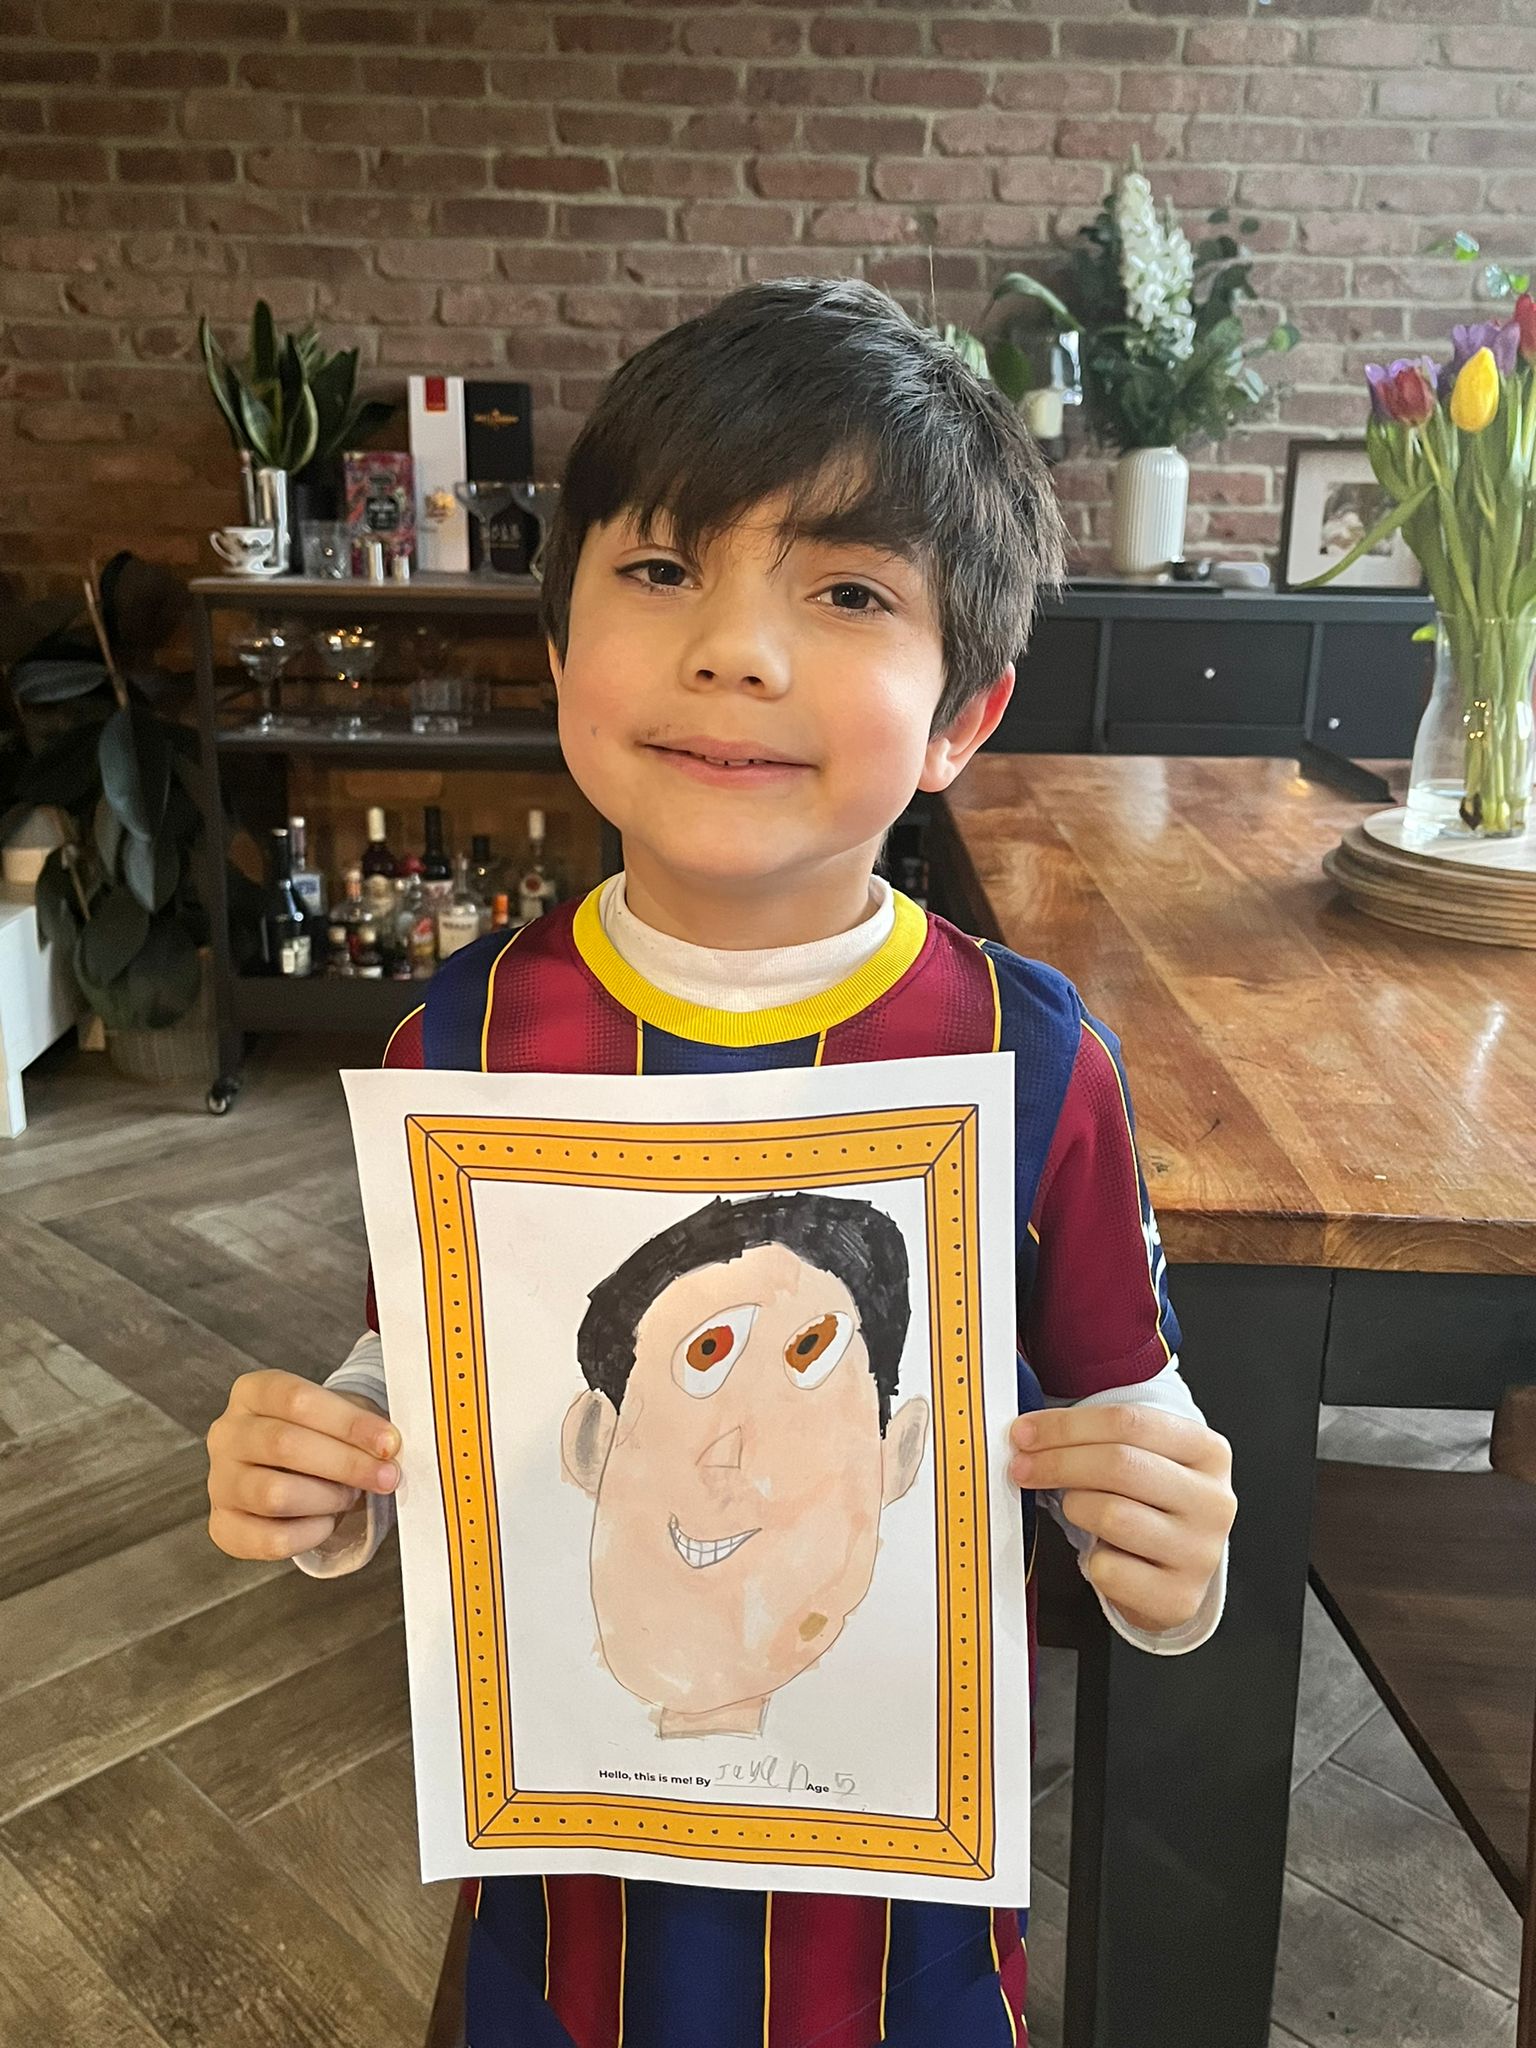 A boy holding a drawing